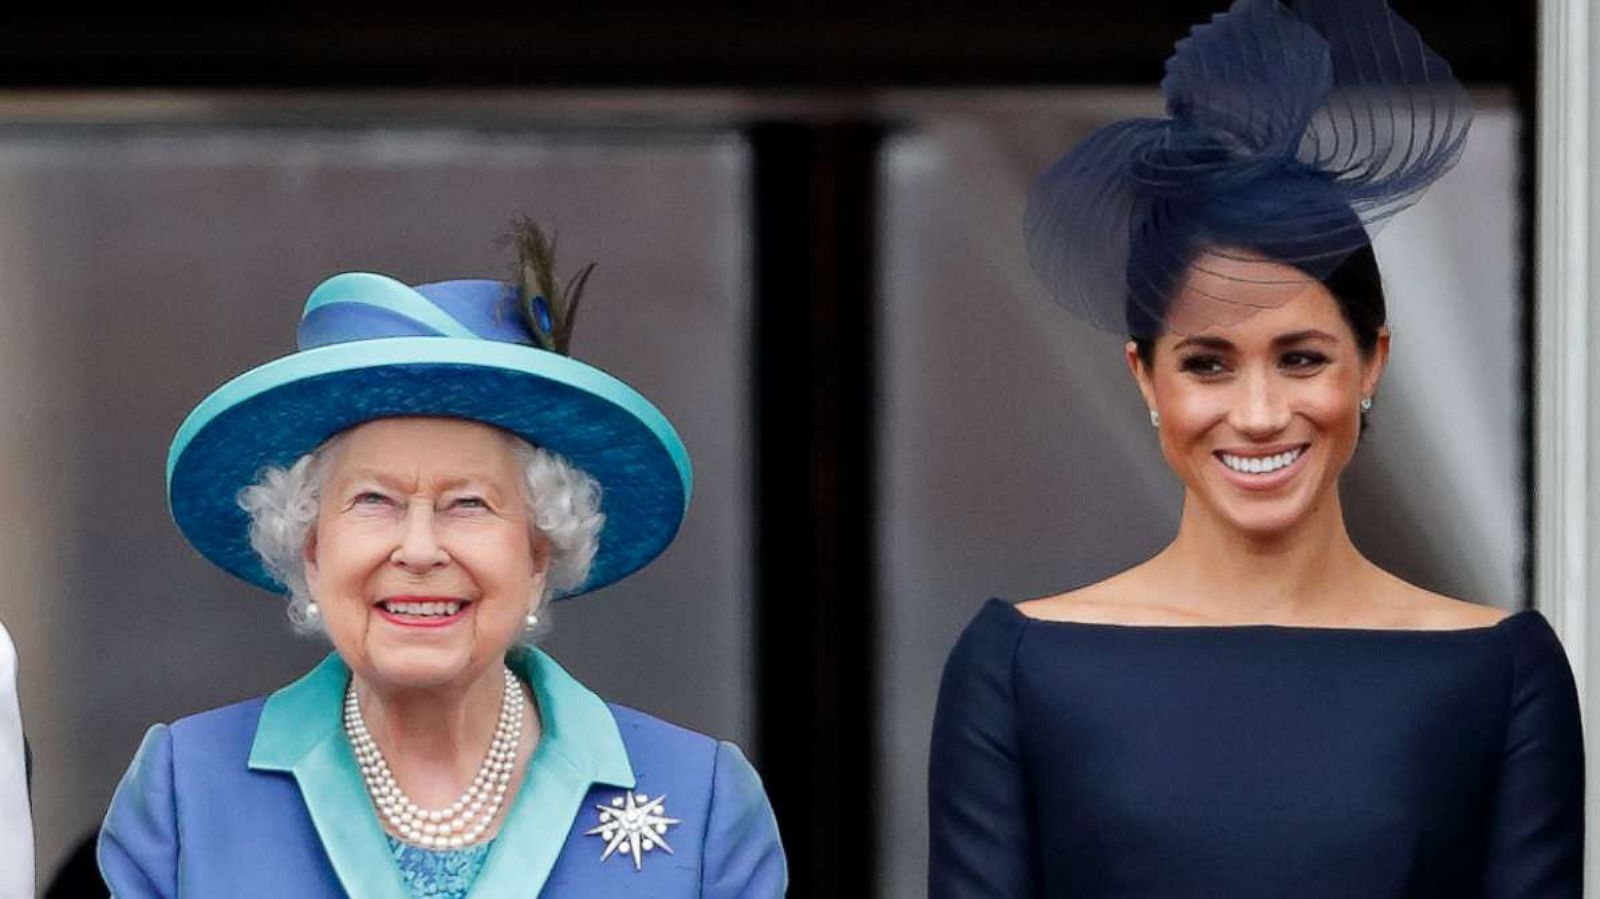 PHOTO: Queen Elizabeth II and Meghan, Duchess of Sussex watch a flypast to mark the centenary of the Royal Air Force from the balcony of Buckingham Palace on July 10, 2018 in London.